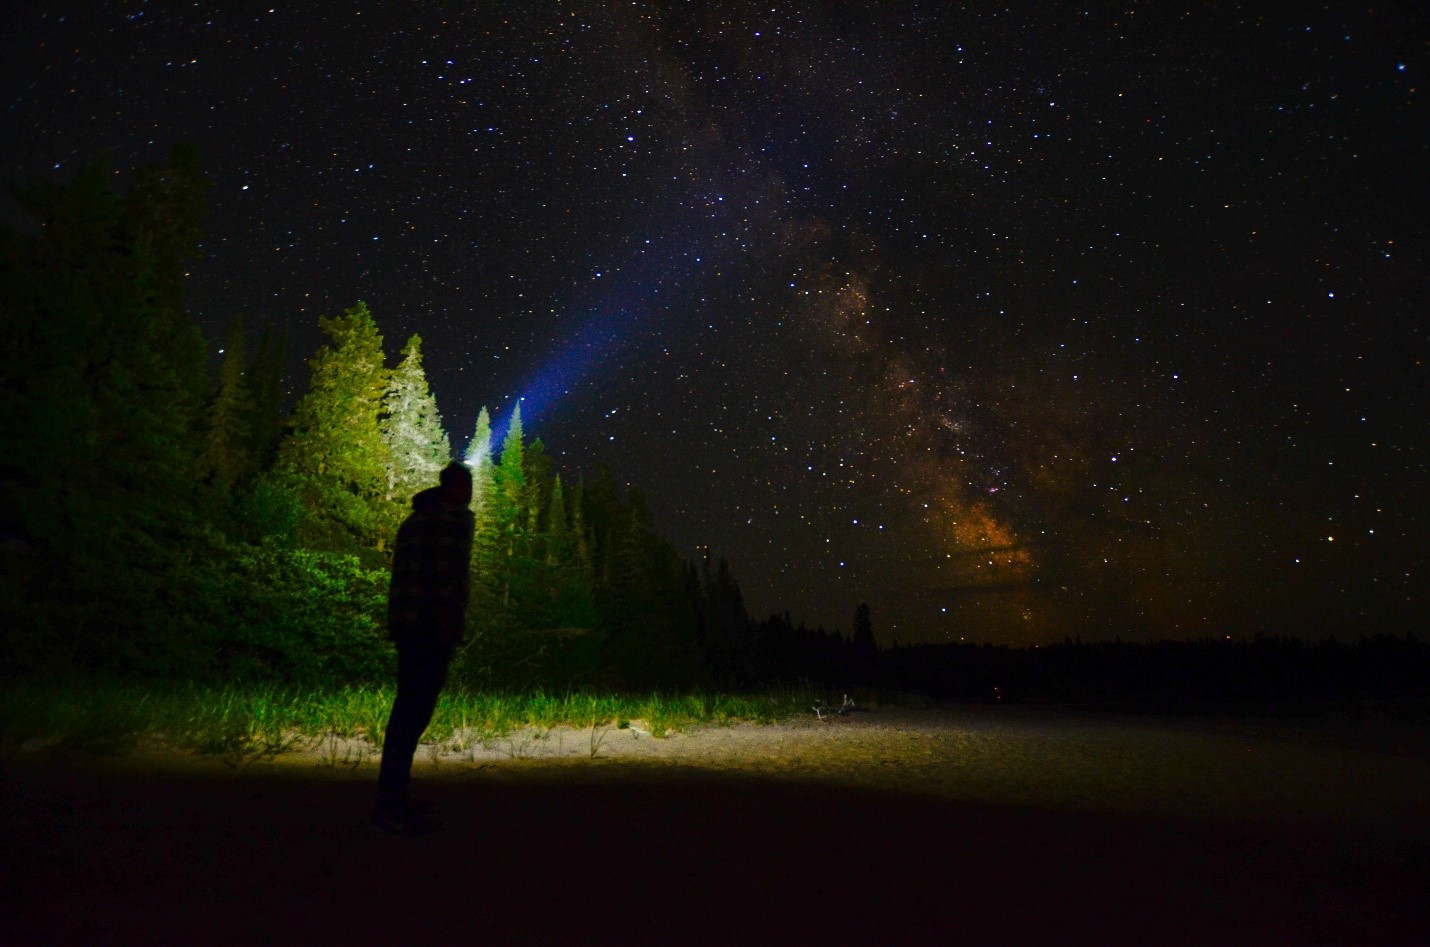 A person standing at the edge of a forest at night, shining their flashlight up towards a star-filled sky